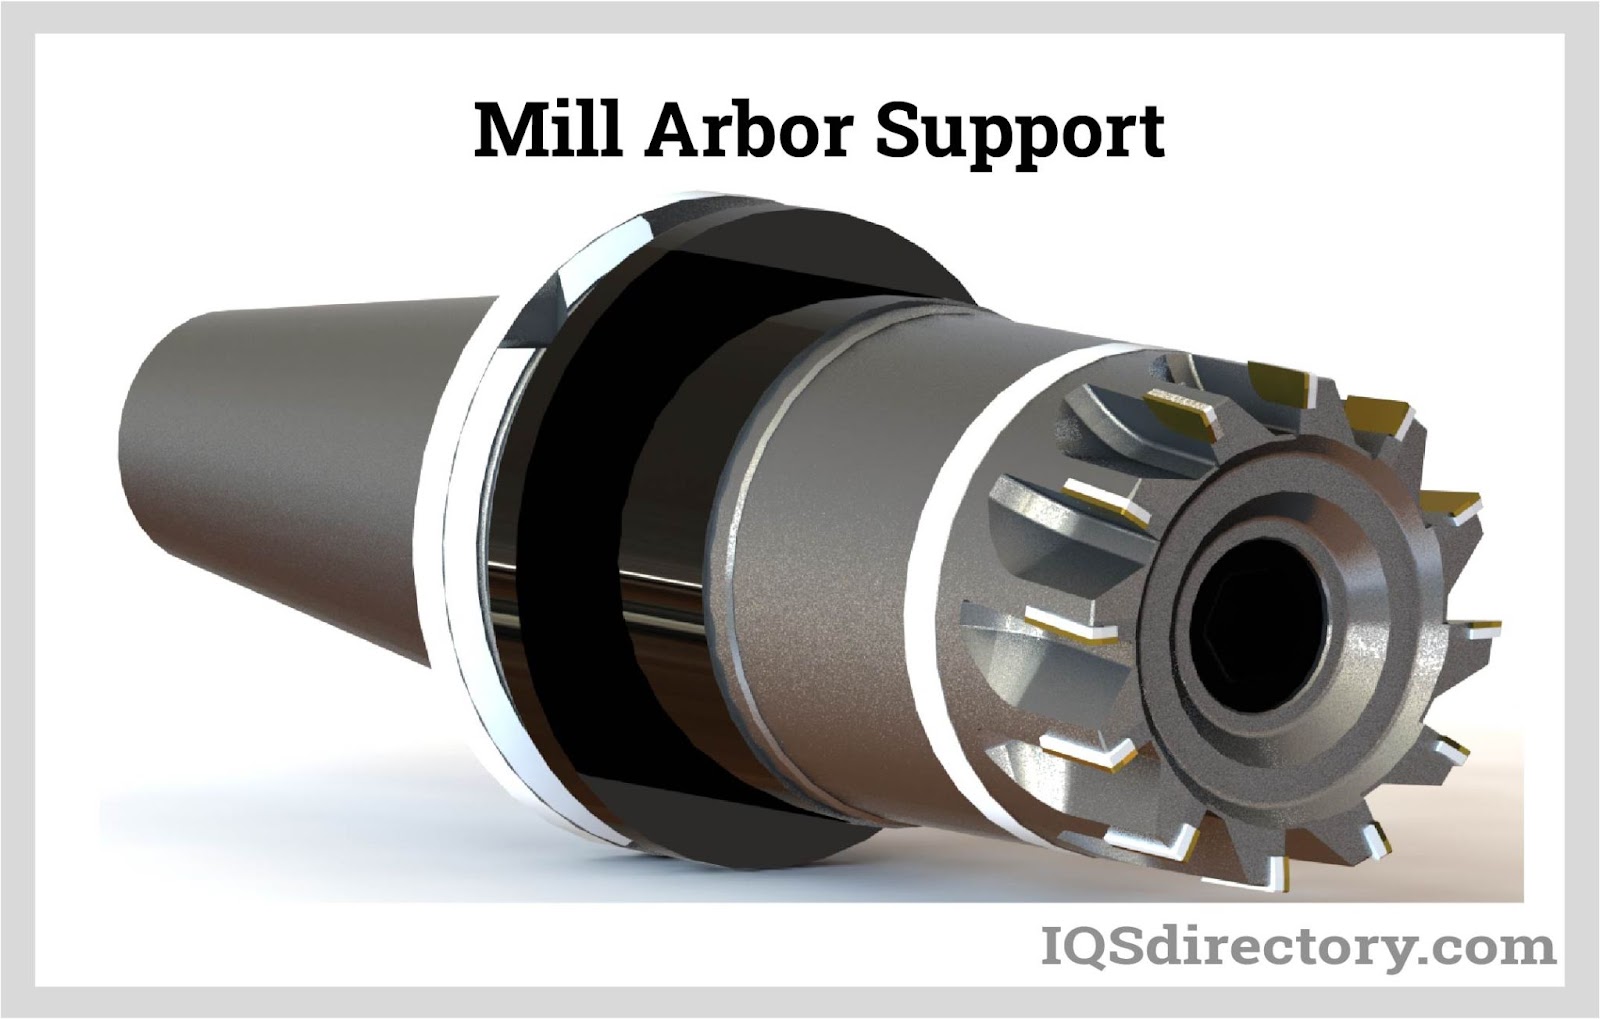 Mill Arbor Support